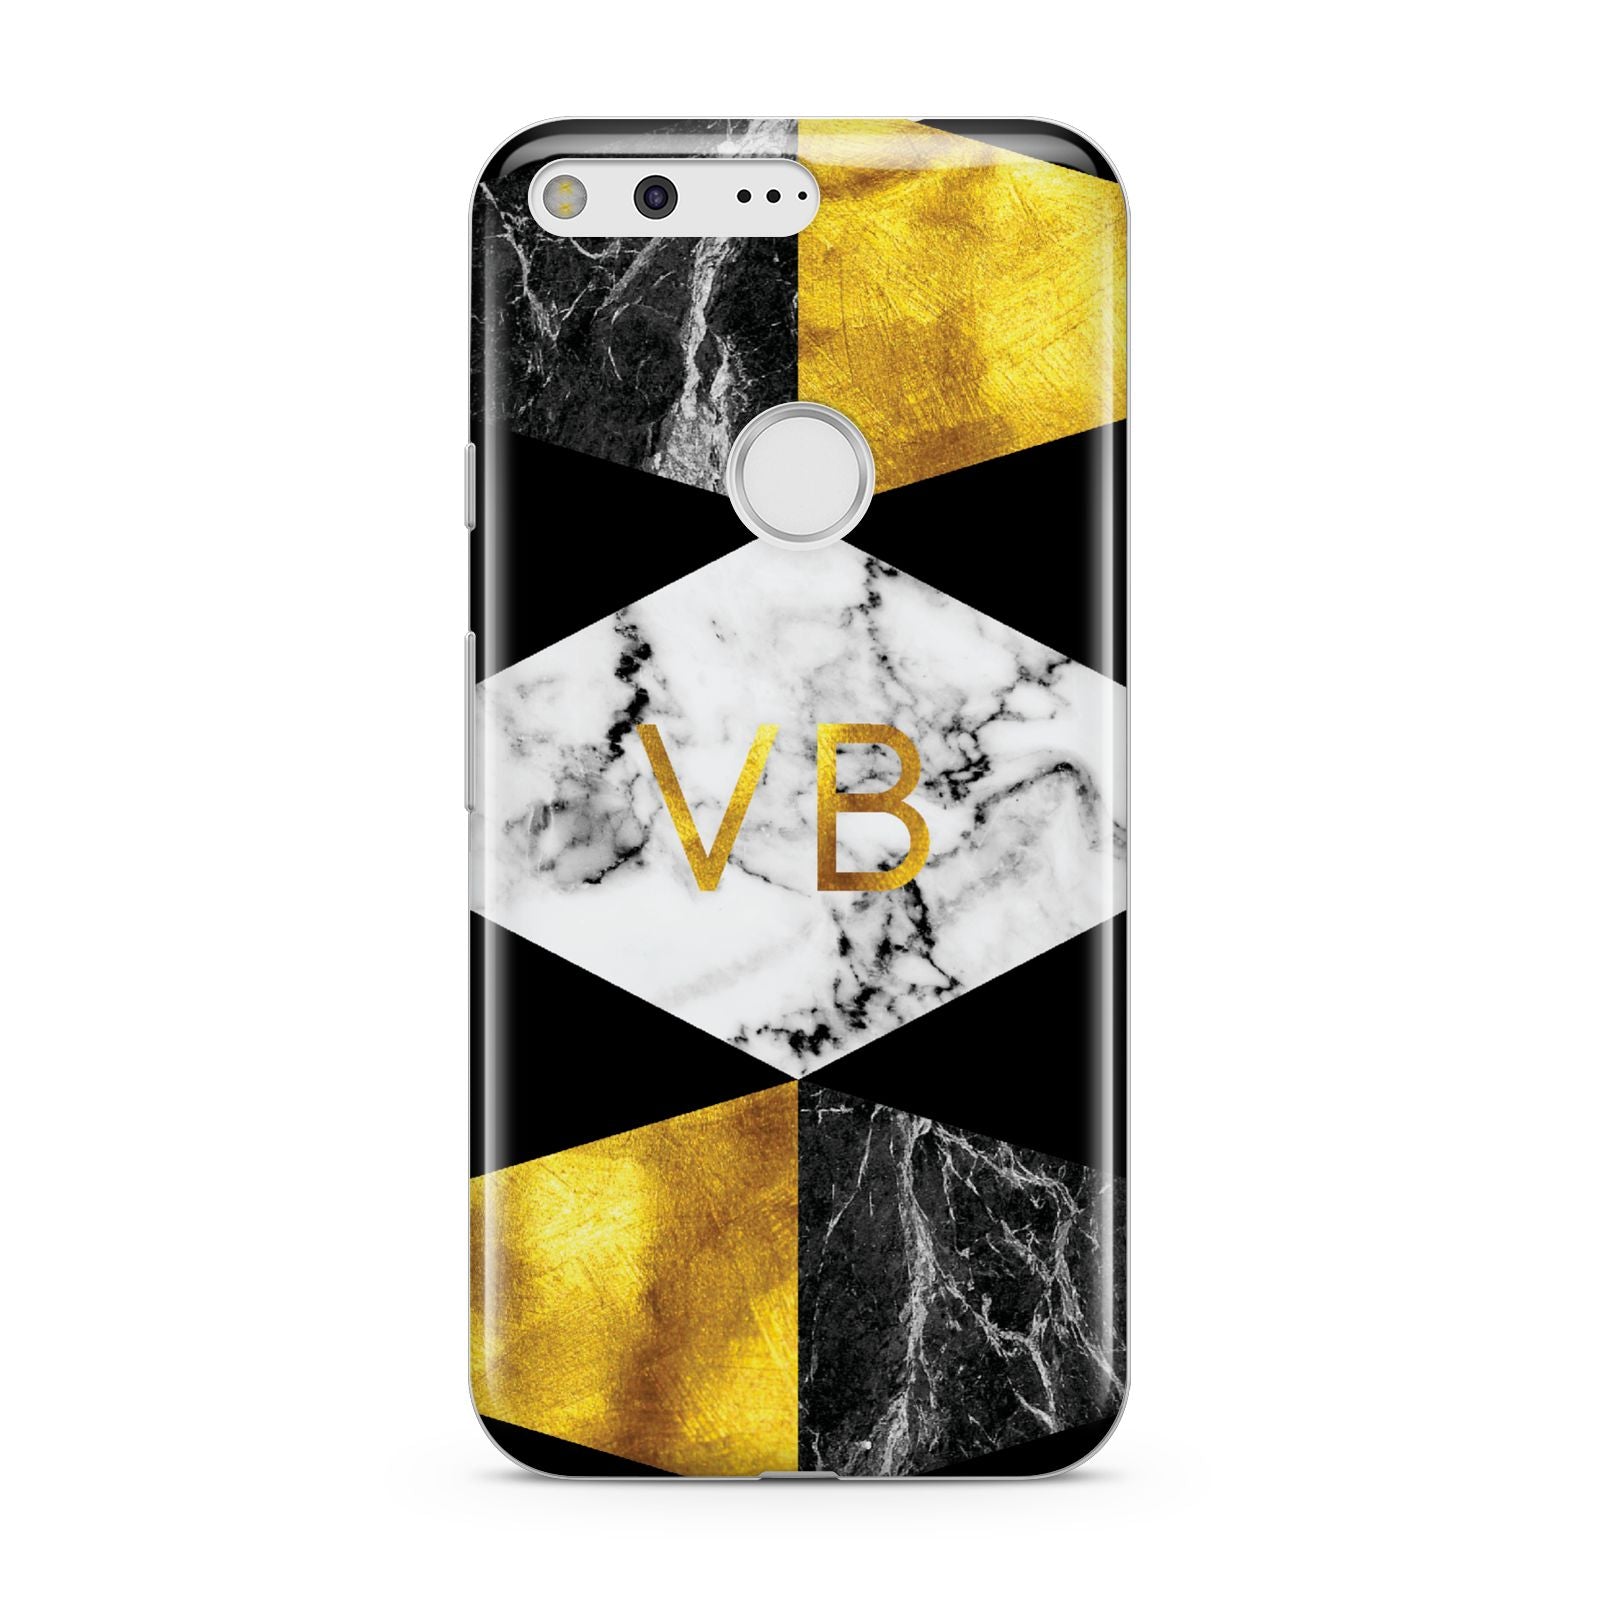 Personalised Gold Marble Initials Google Pixel Case